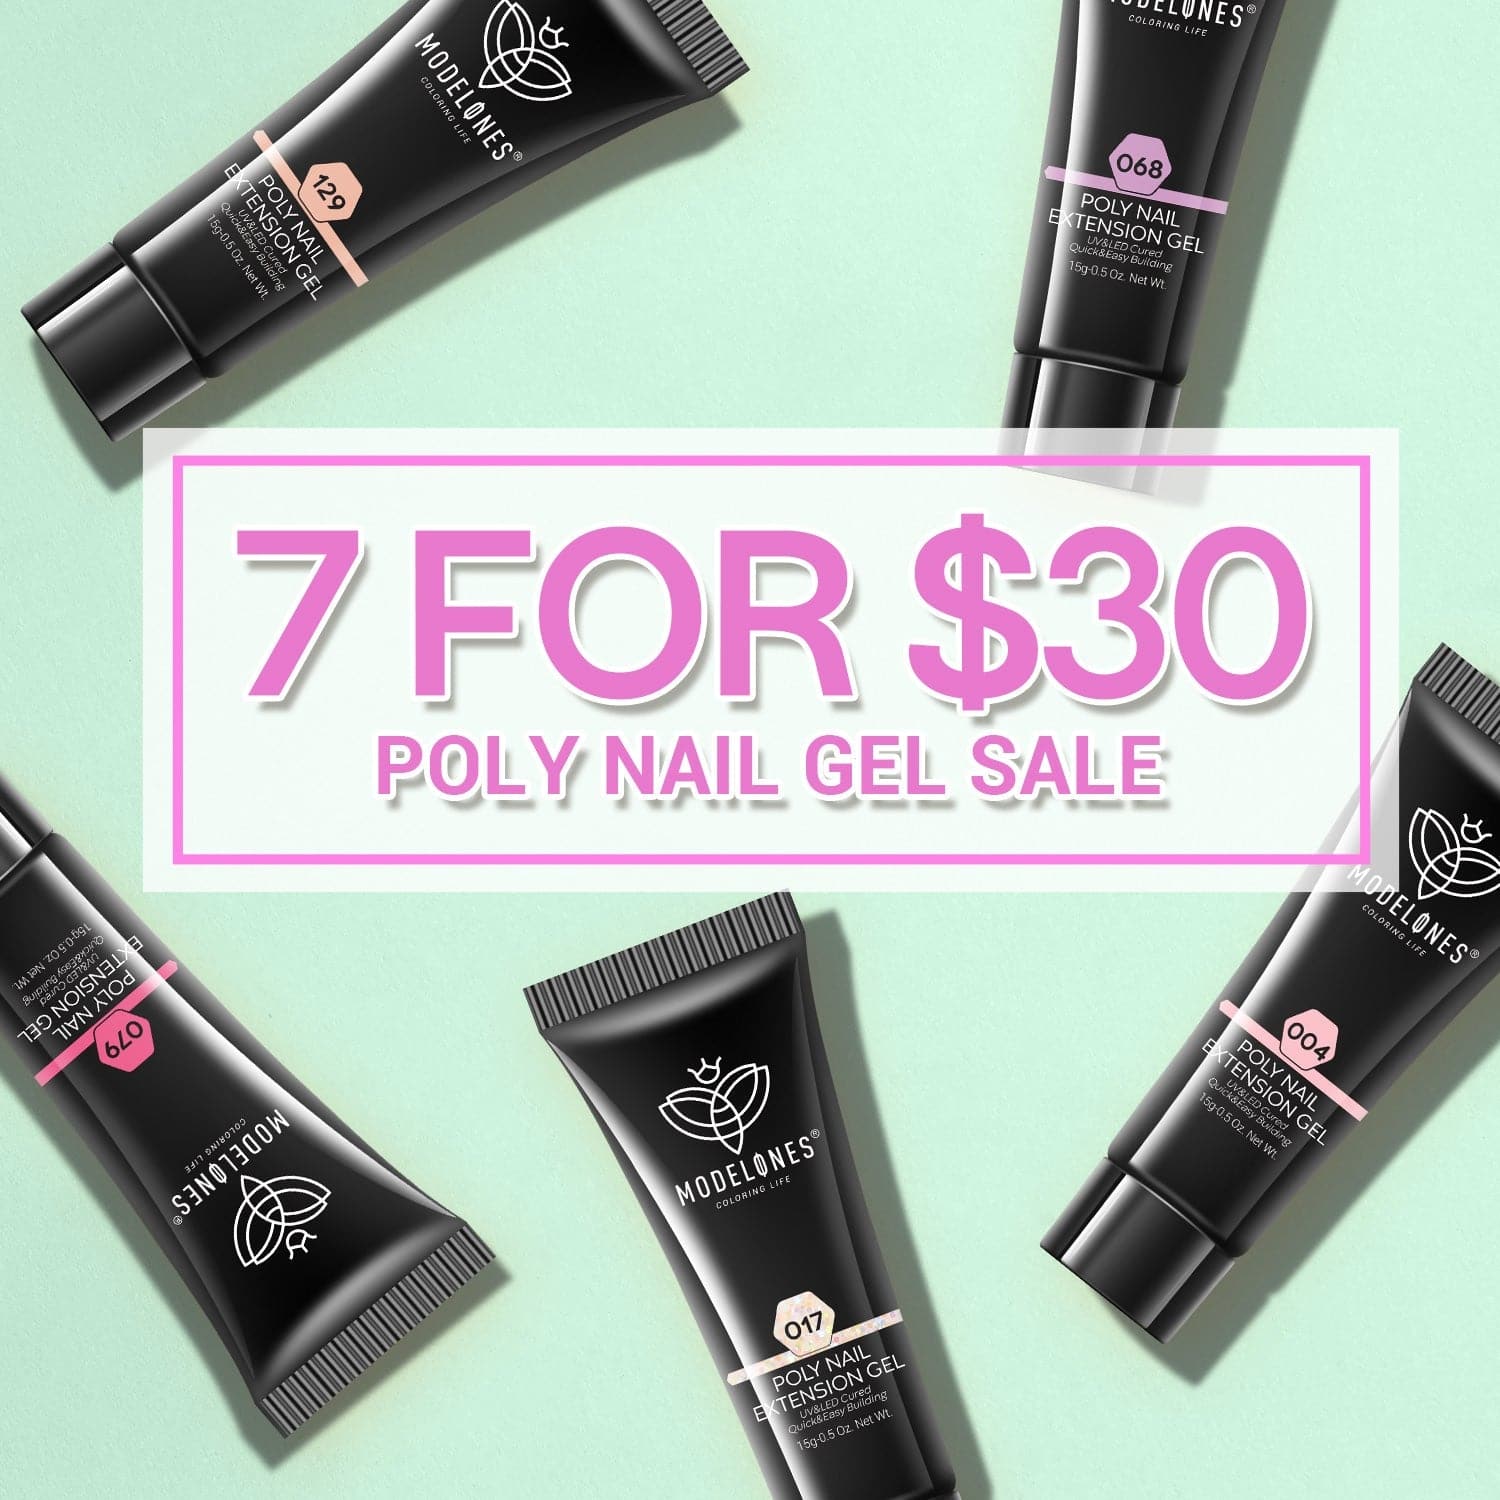 7 For $30 Sale Poly Nail Gel 15g - MODELONES.com